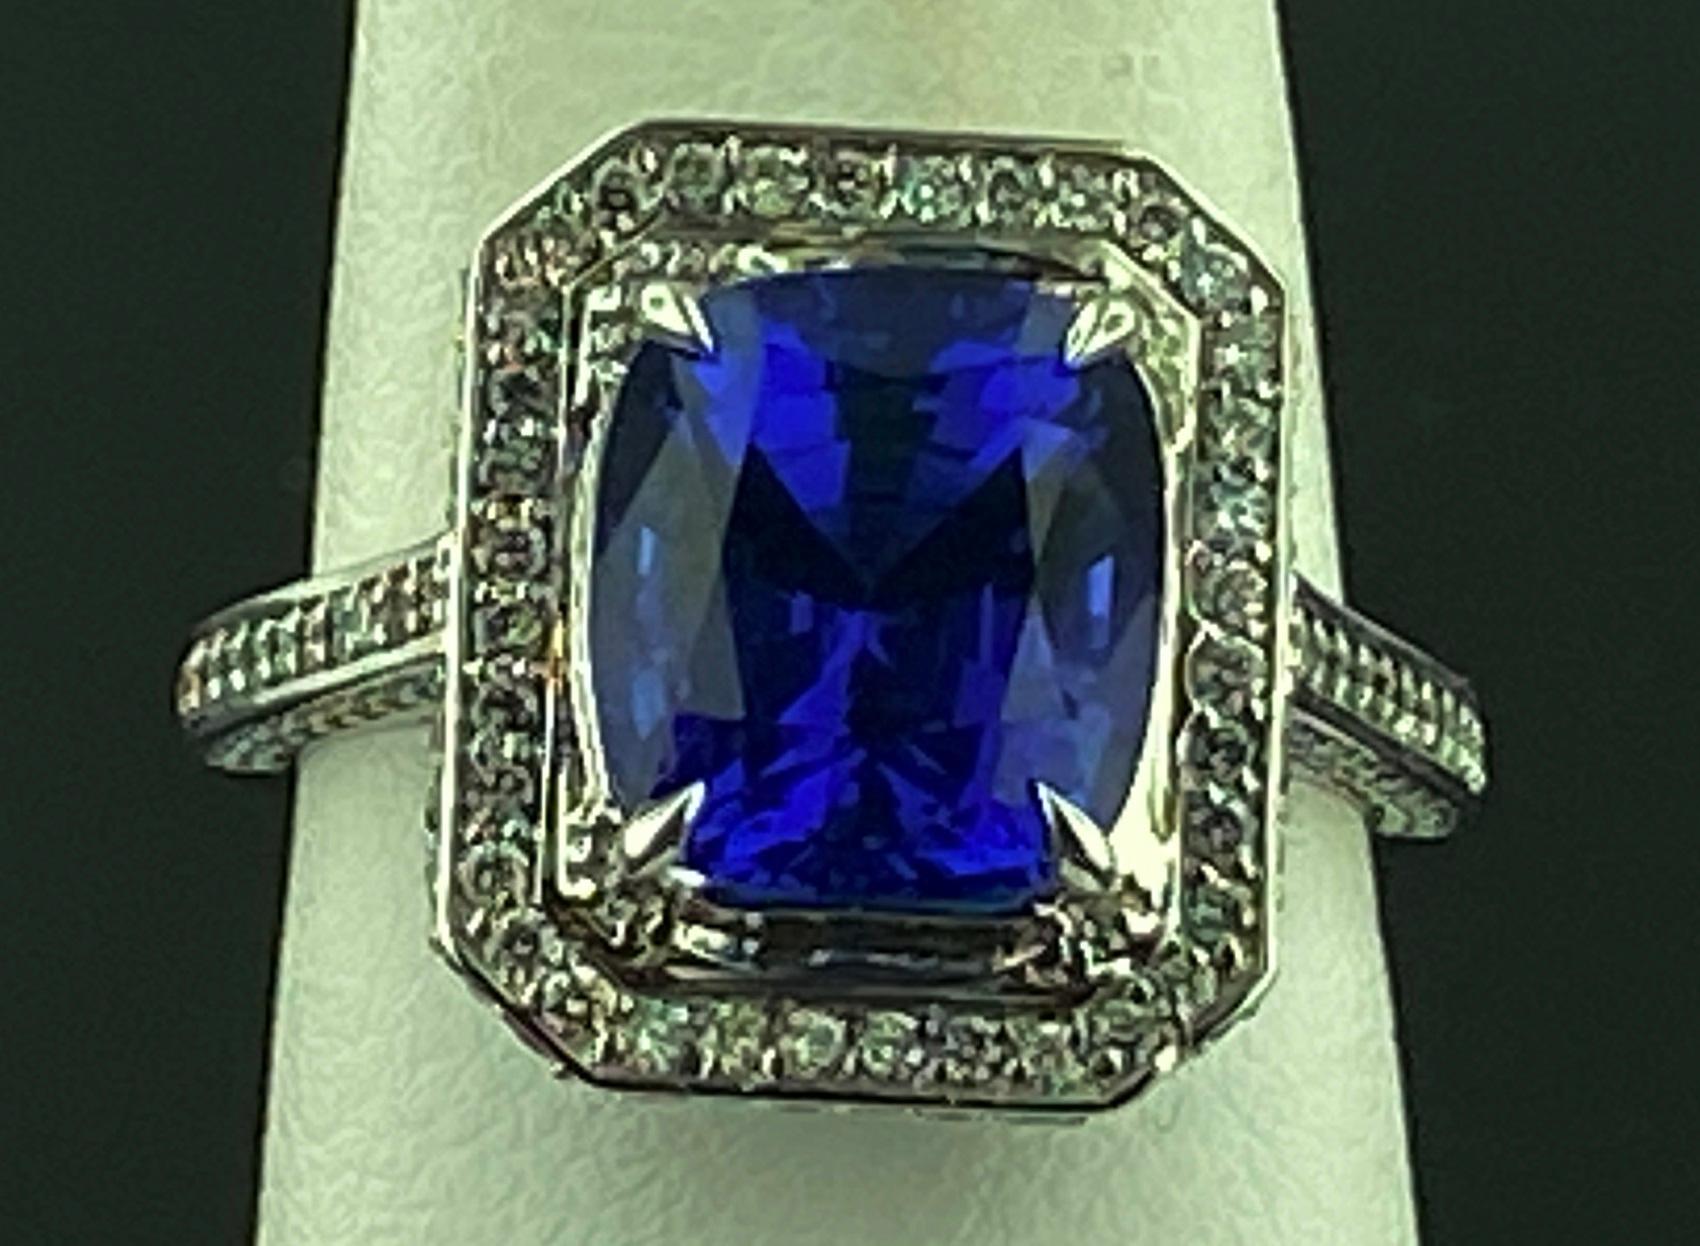 Set in a 18 karat white gold mounting, weighing 6 grams, is a 4.21 carat square cut Tanzanite surrounded with 146 Round Brilliant Cut diamonds with a total diamond weight of 0.70 carats.  Color Range is G-H, Clarity is VS.  Ring size is 6.